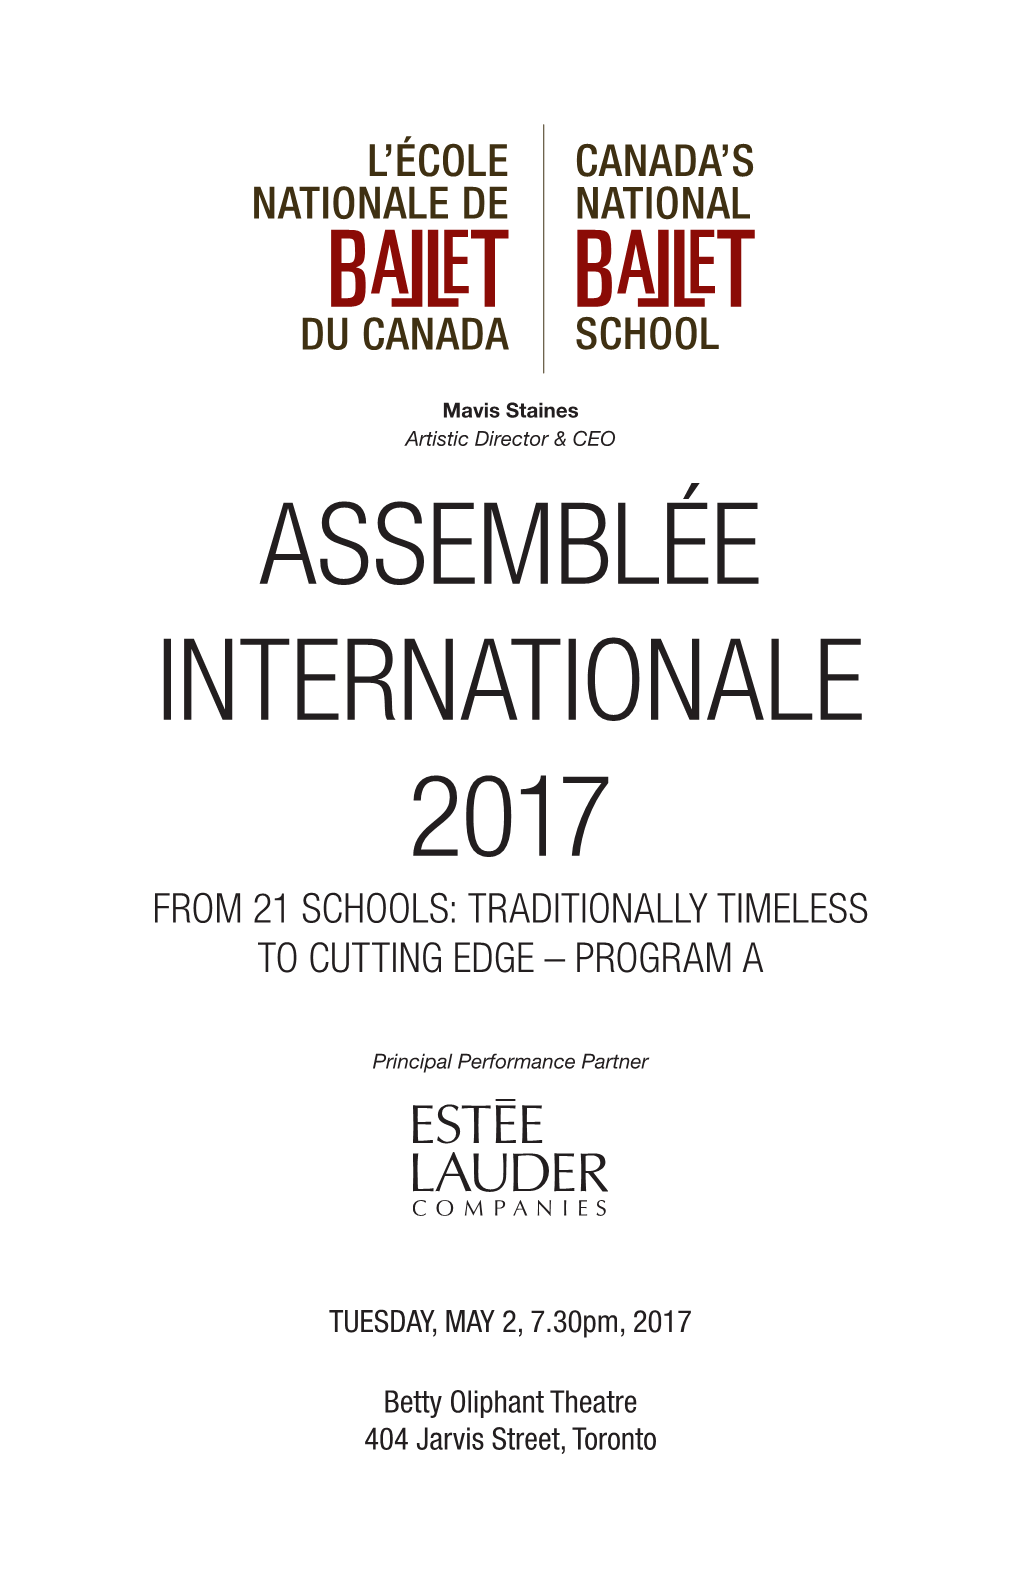 Assemblée Internationale 2017 from 21 Schools: Traditionally Timeless to Cutting Edge – Program A